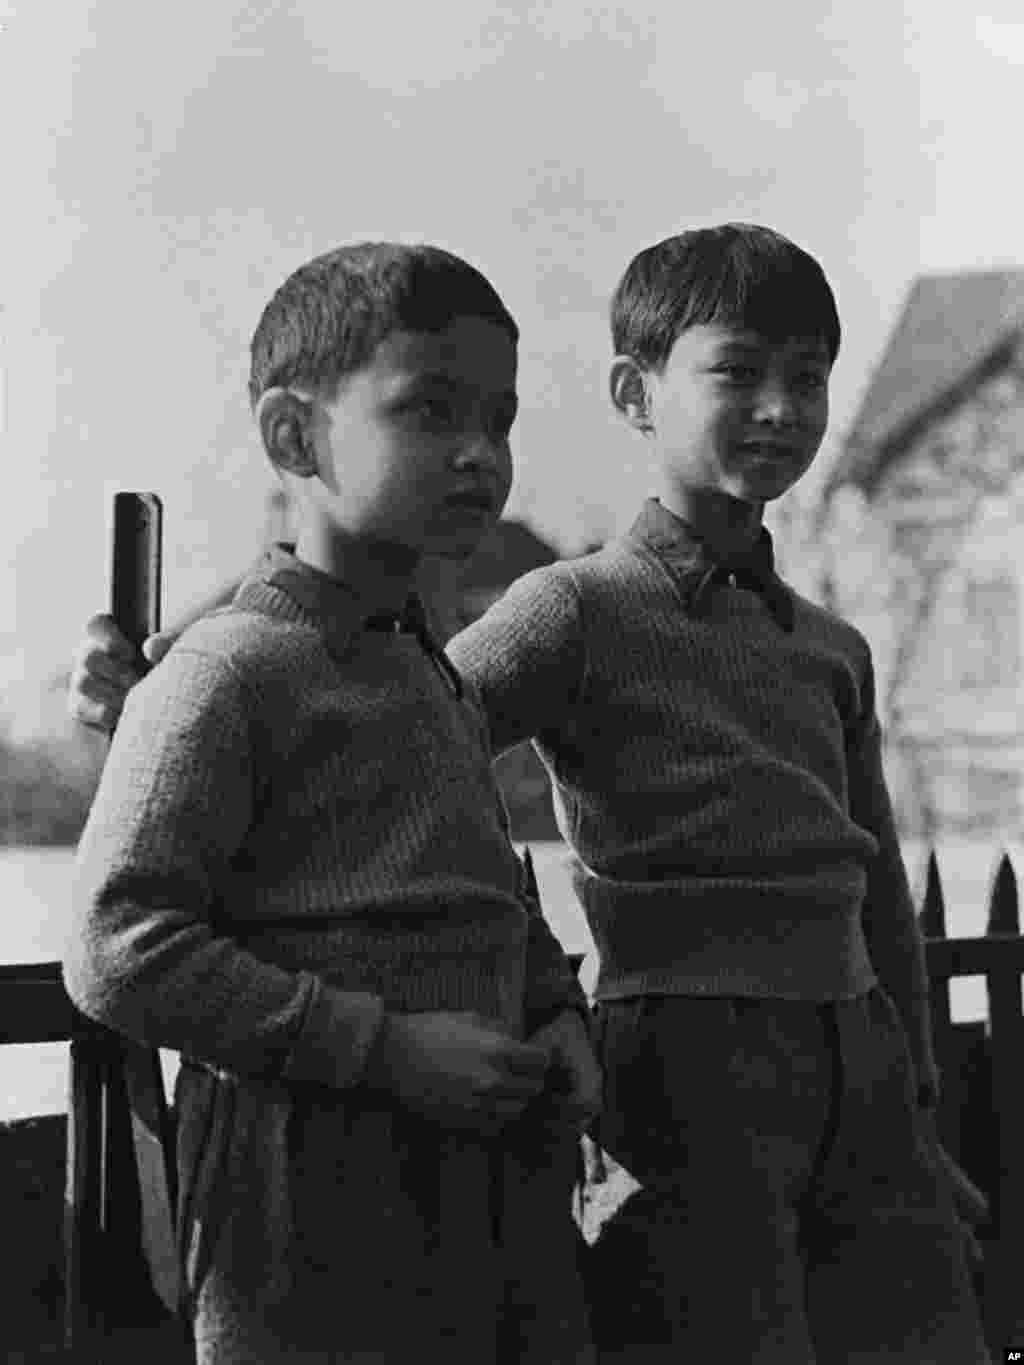 Thailand&#39;s Prince Bhumibol, left, now King Bhumibol Adulyadej, known as Rama IX, with his brother Prince Ananda, the former King Ananada Mahidol, in the grounds of the school in Lausanne Switzerland, on March 7, 1935.